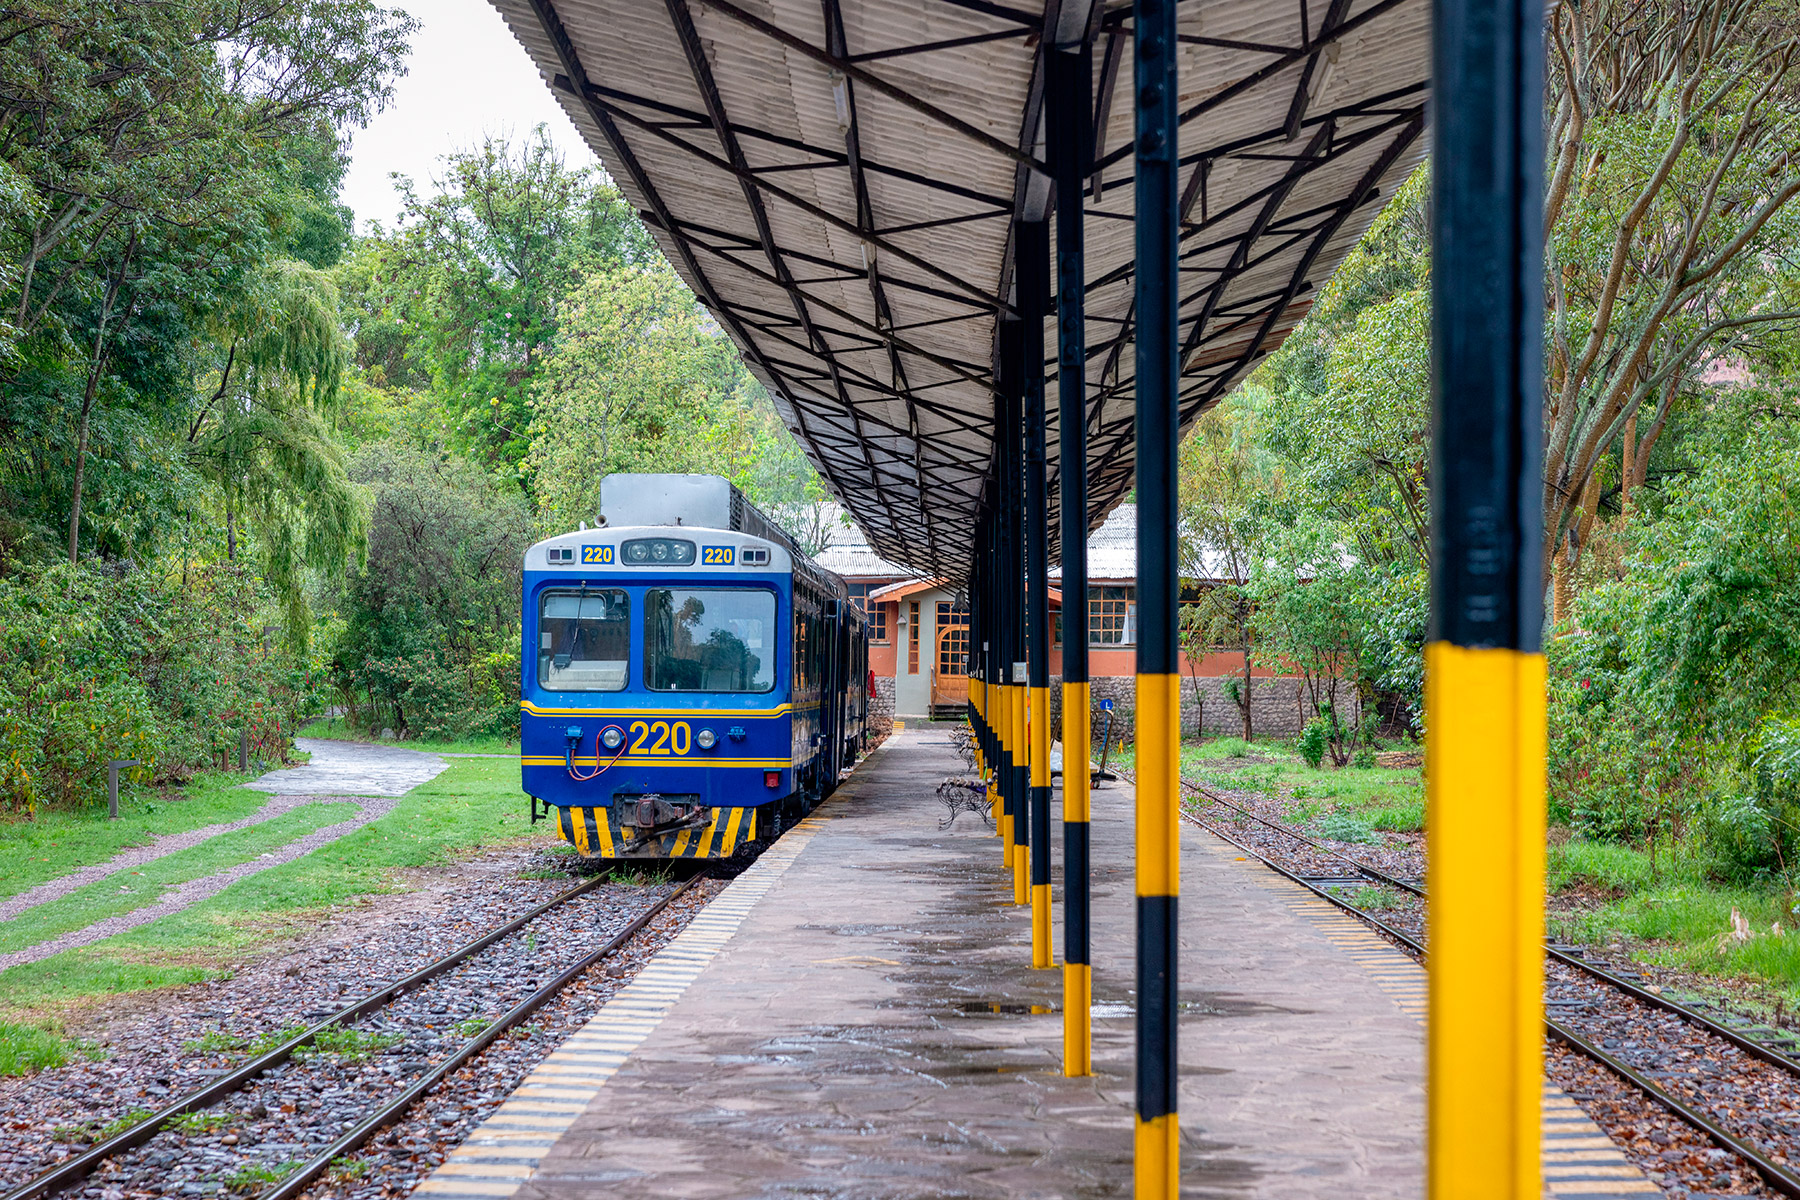 Our train waits for passengers at Urubamba Station